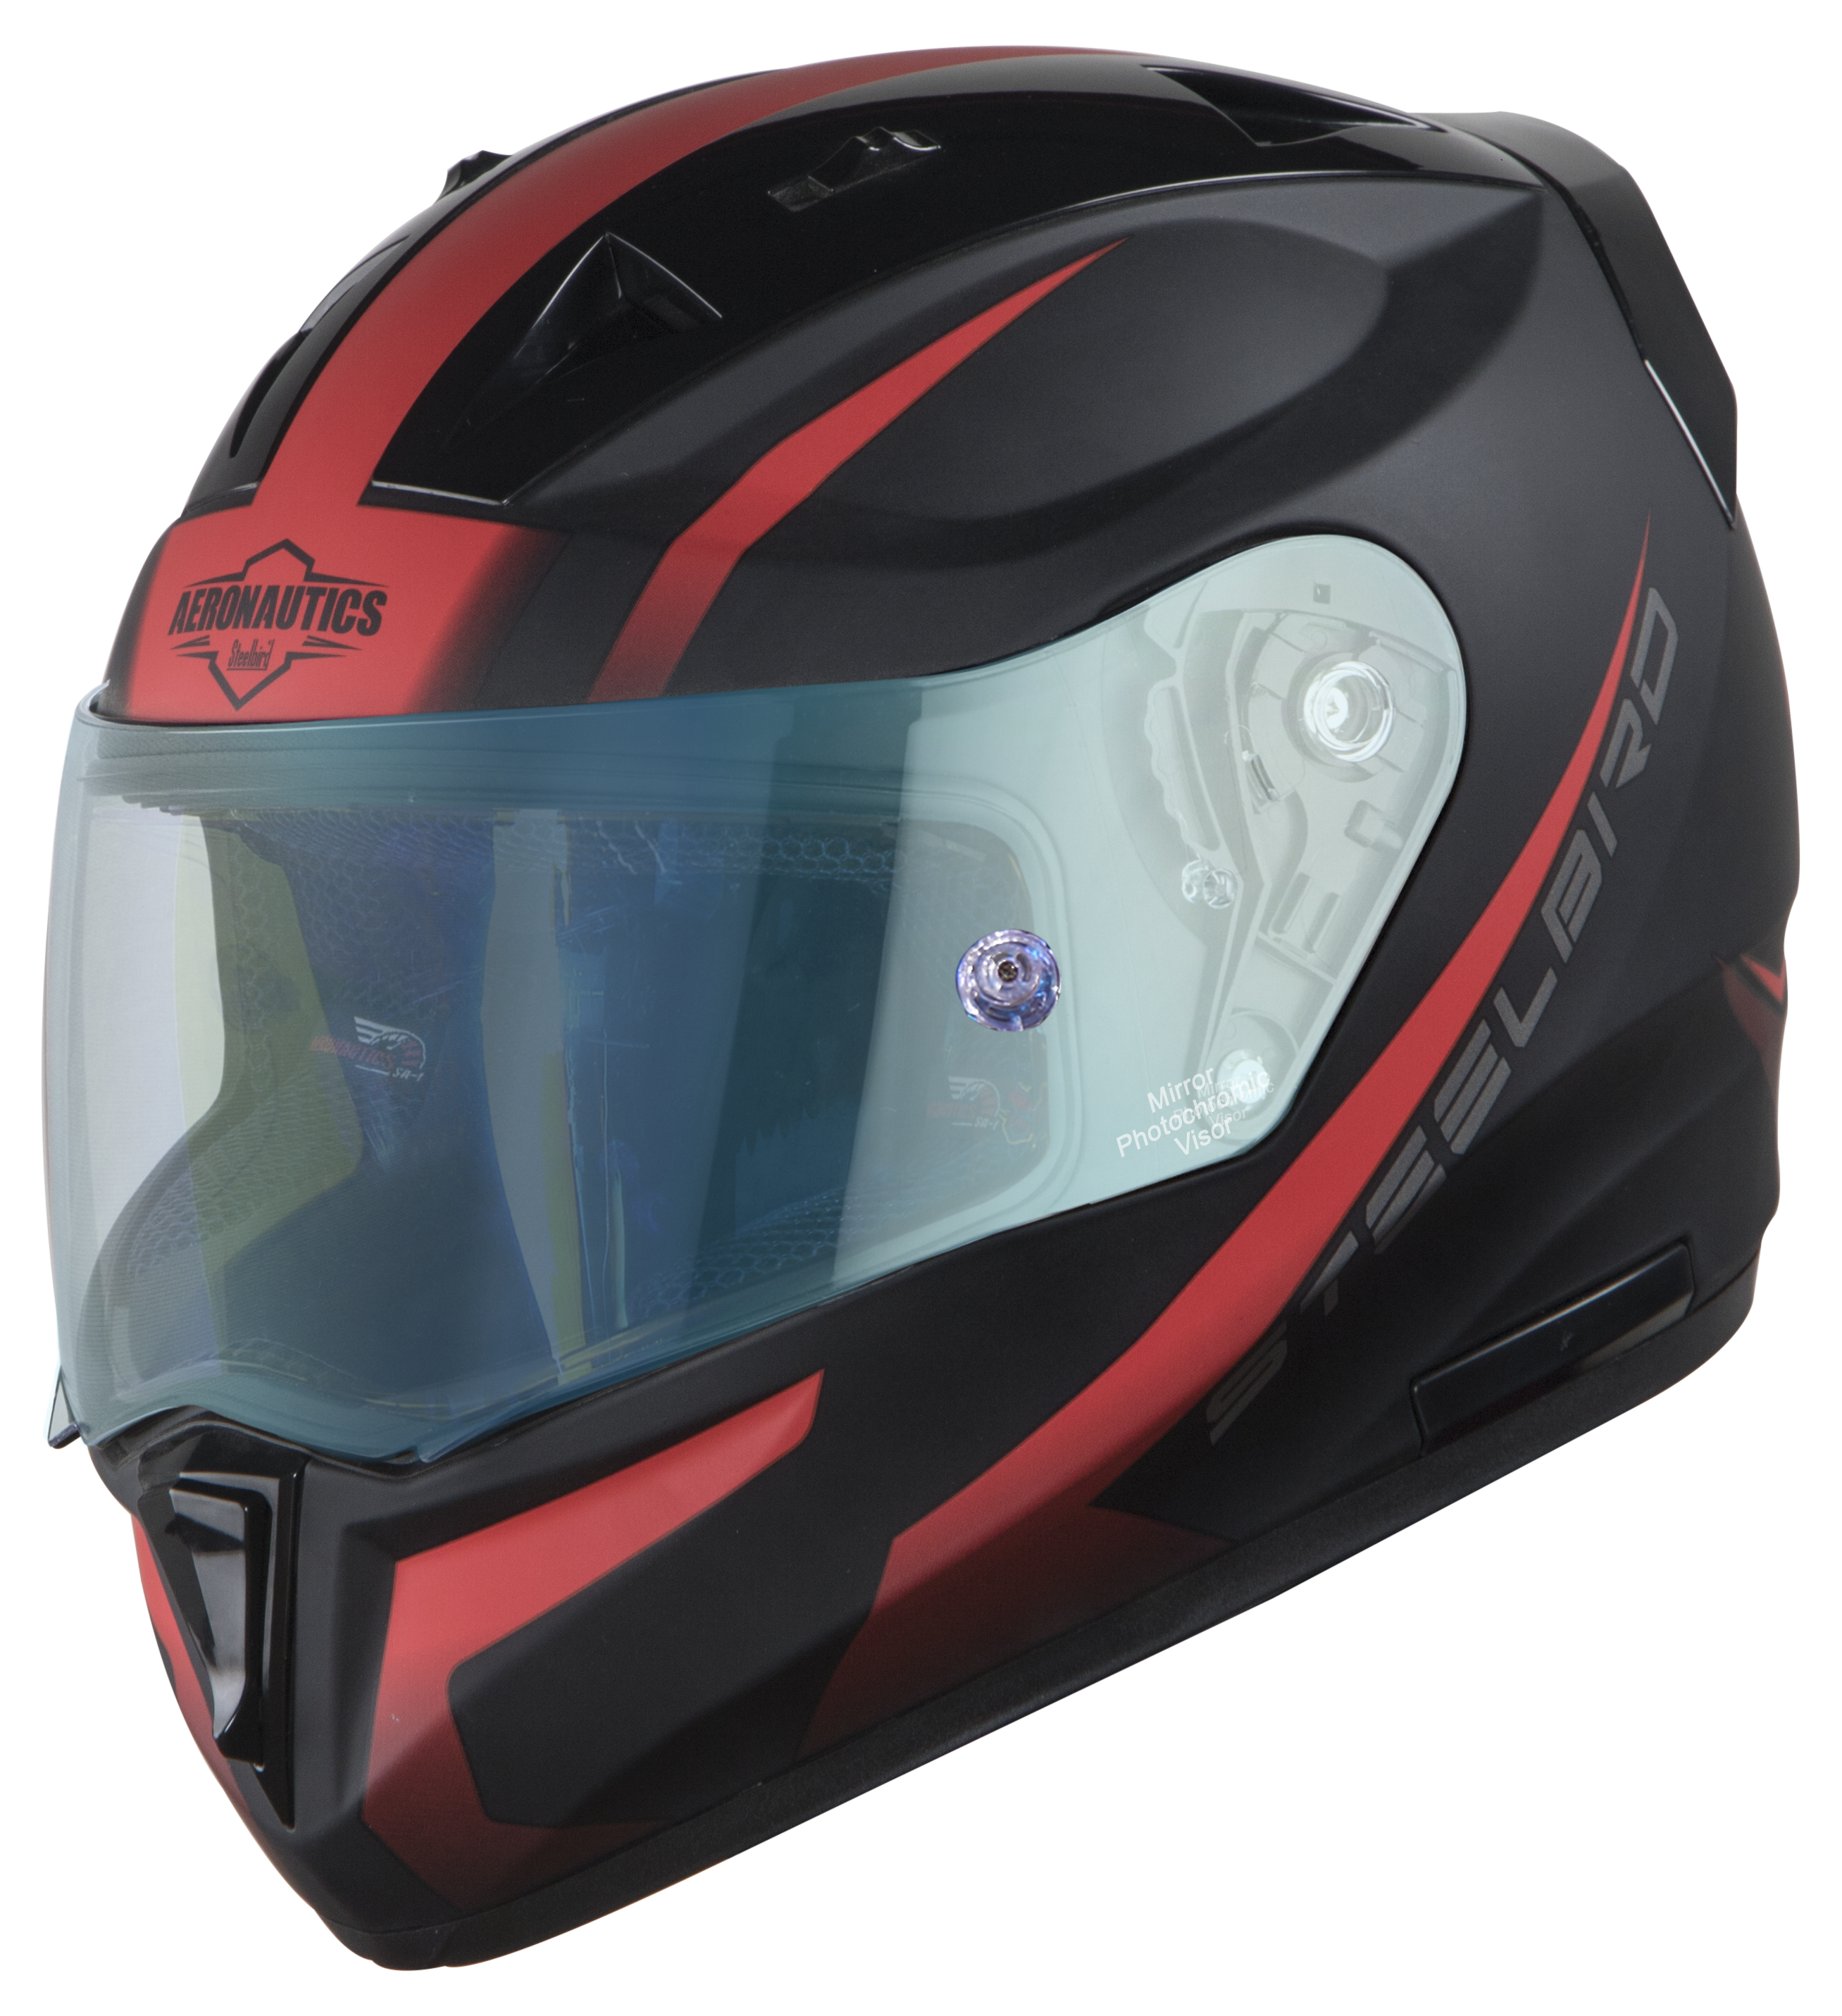 SA-1 WHIF Mat Black/Red (Fitted With Clear Visor Extra Anti-Fog Shield Blue Night Vision Photochromic Visor Free)